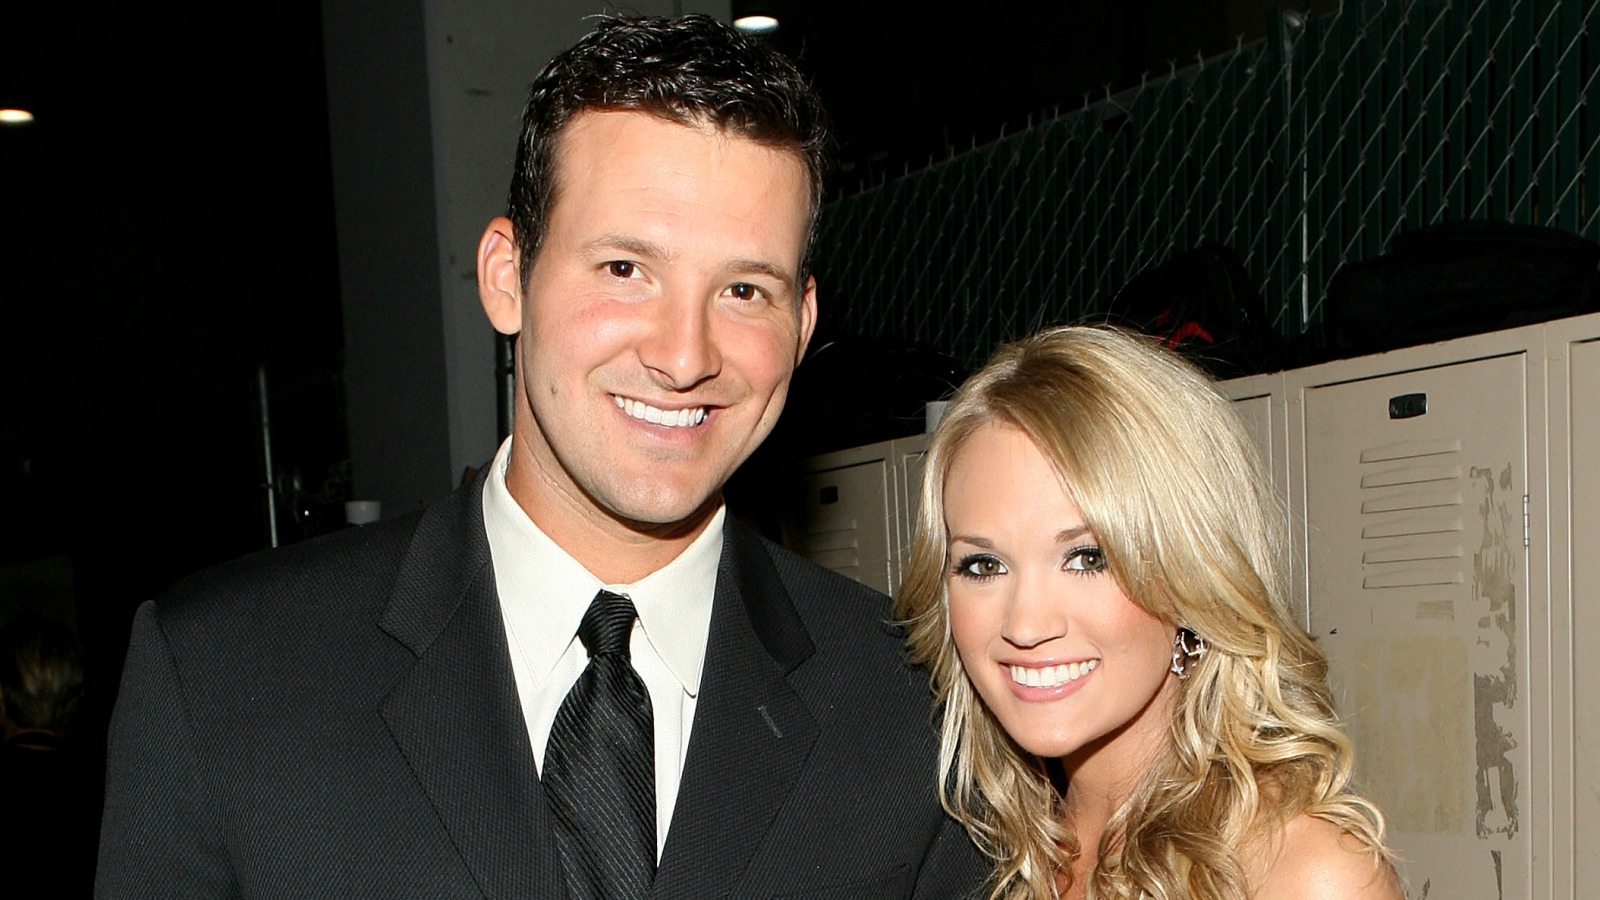 The real reason Carrie Underwood and Tony Romo broke up